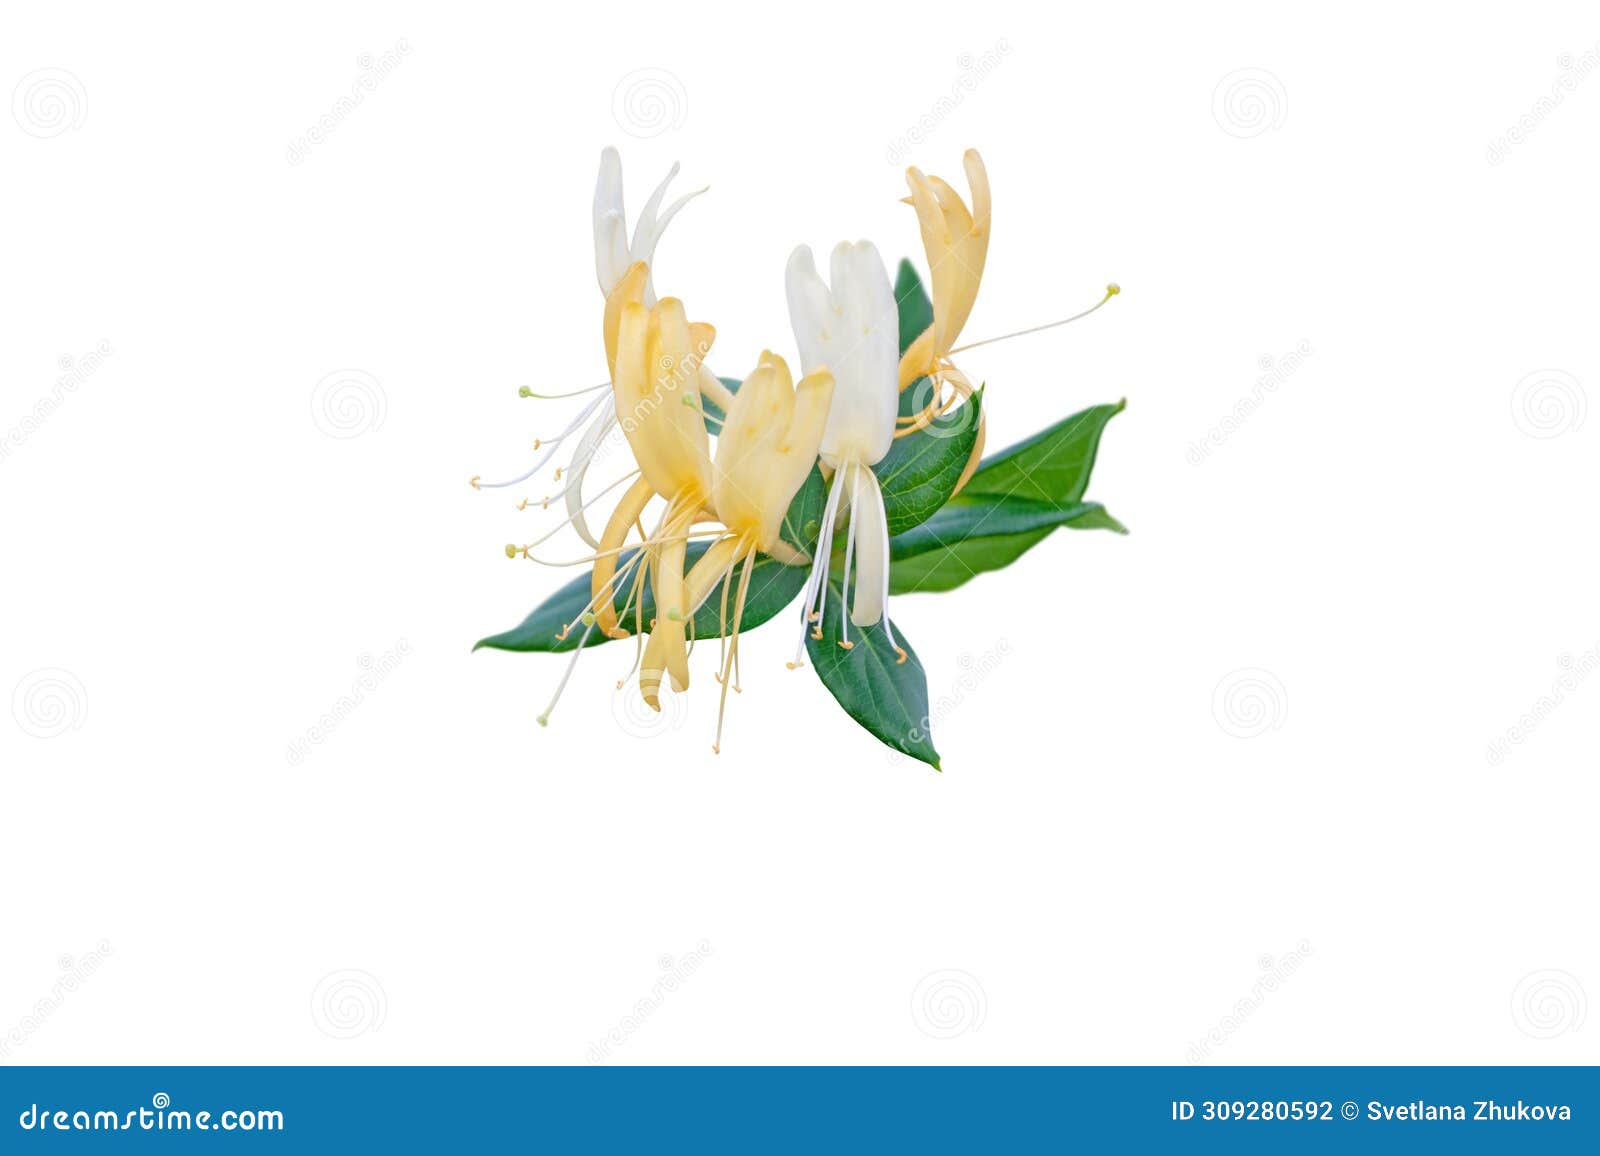 honeysuckle or lonicera japonica branch with flowers and leaves  on white. transparent png additional format